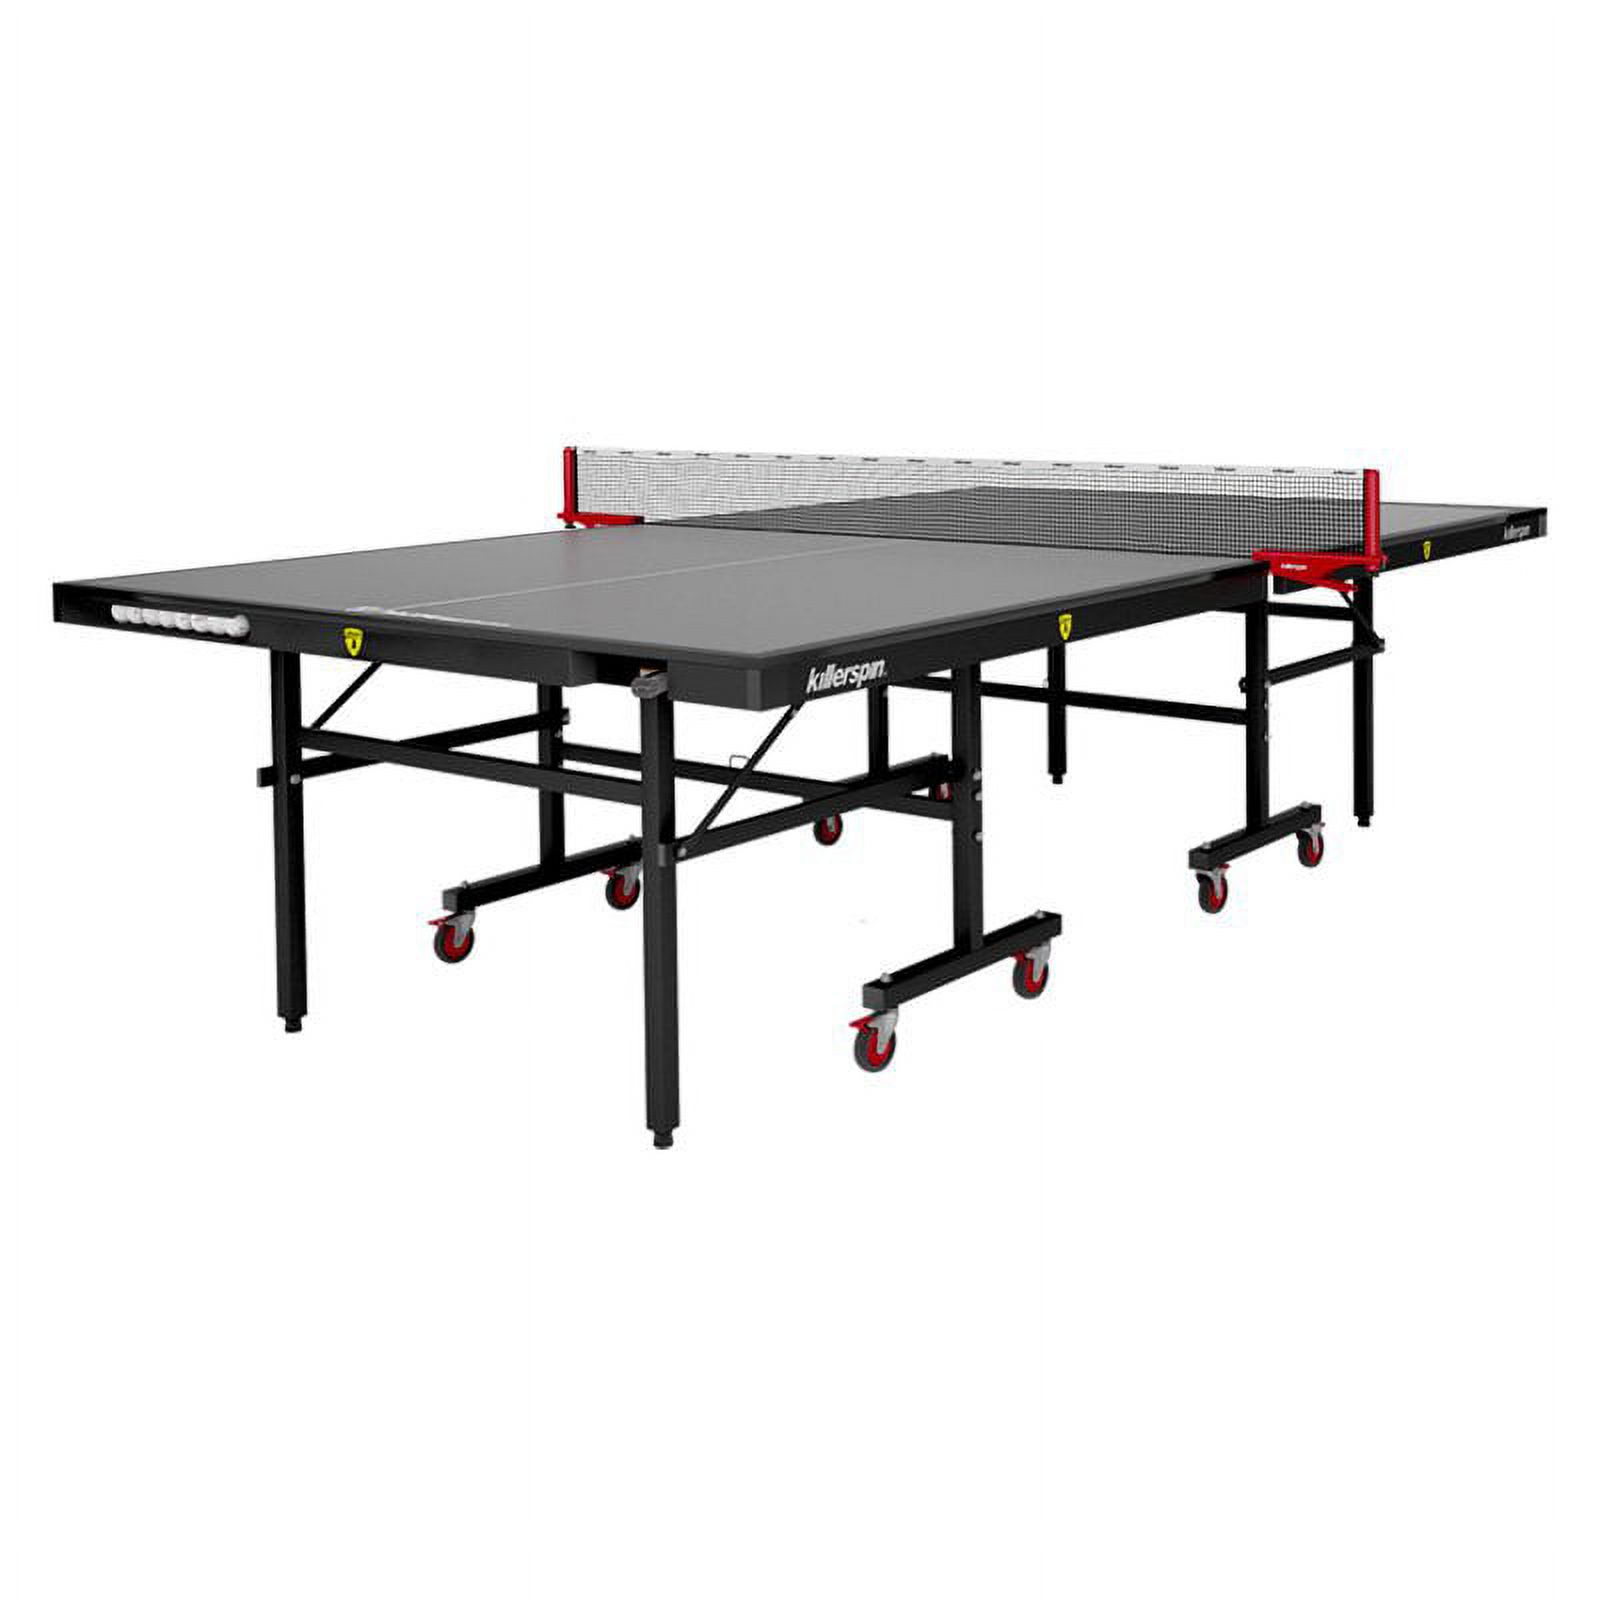 Killerspin MyT4 BlackPocket, ITTF Offcial Size, Folding Indoor Tennis Table, 9' x 5' x 2.5" - image 1 of 9